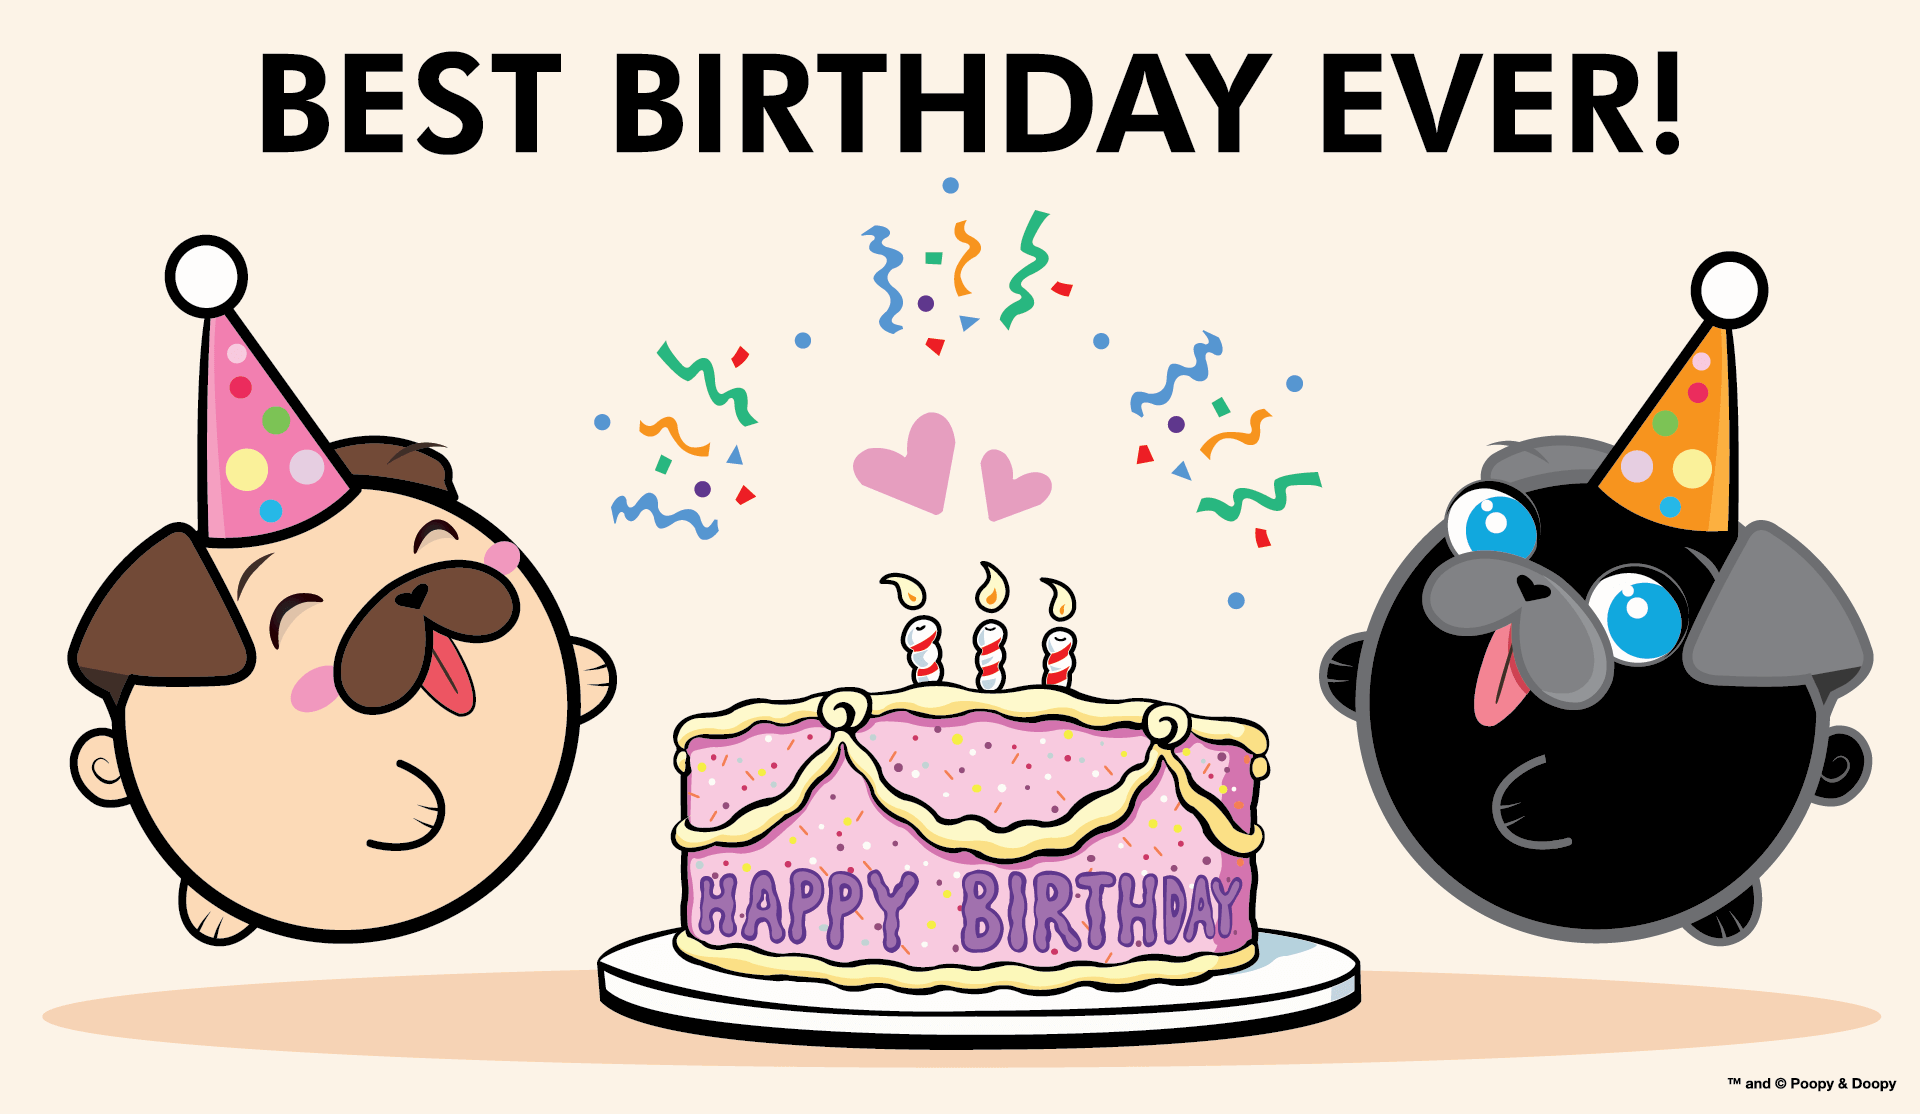 Poopy and Doopy - Happy Birthday